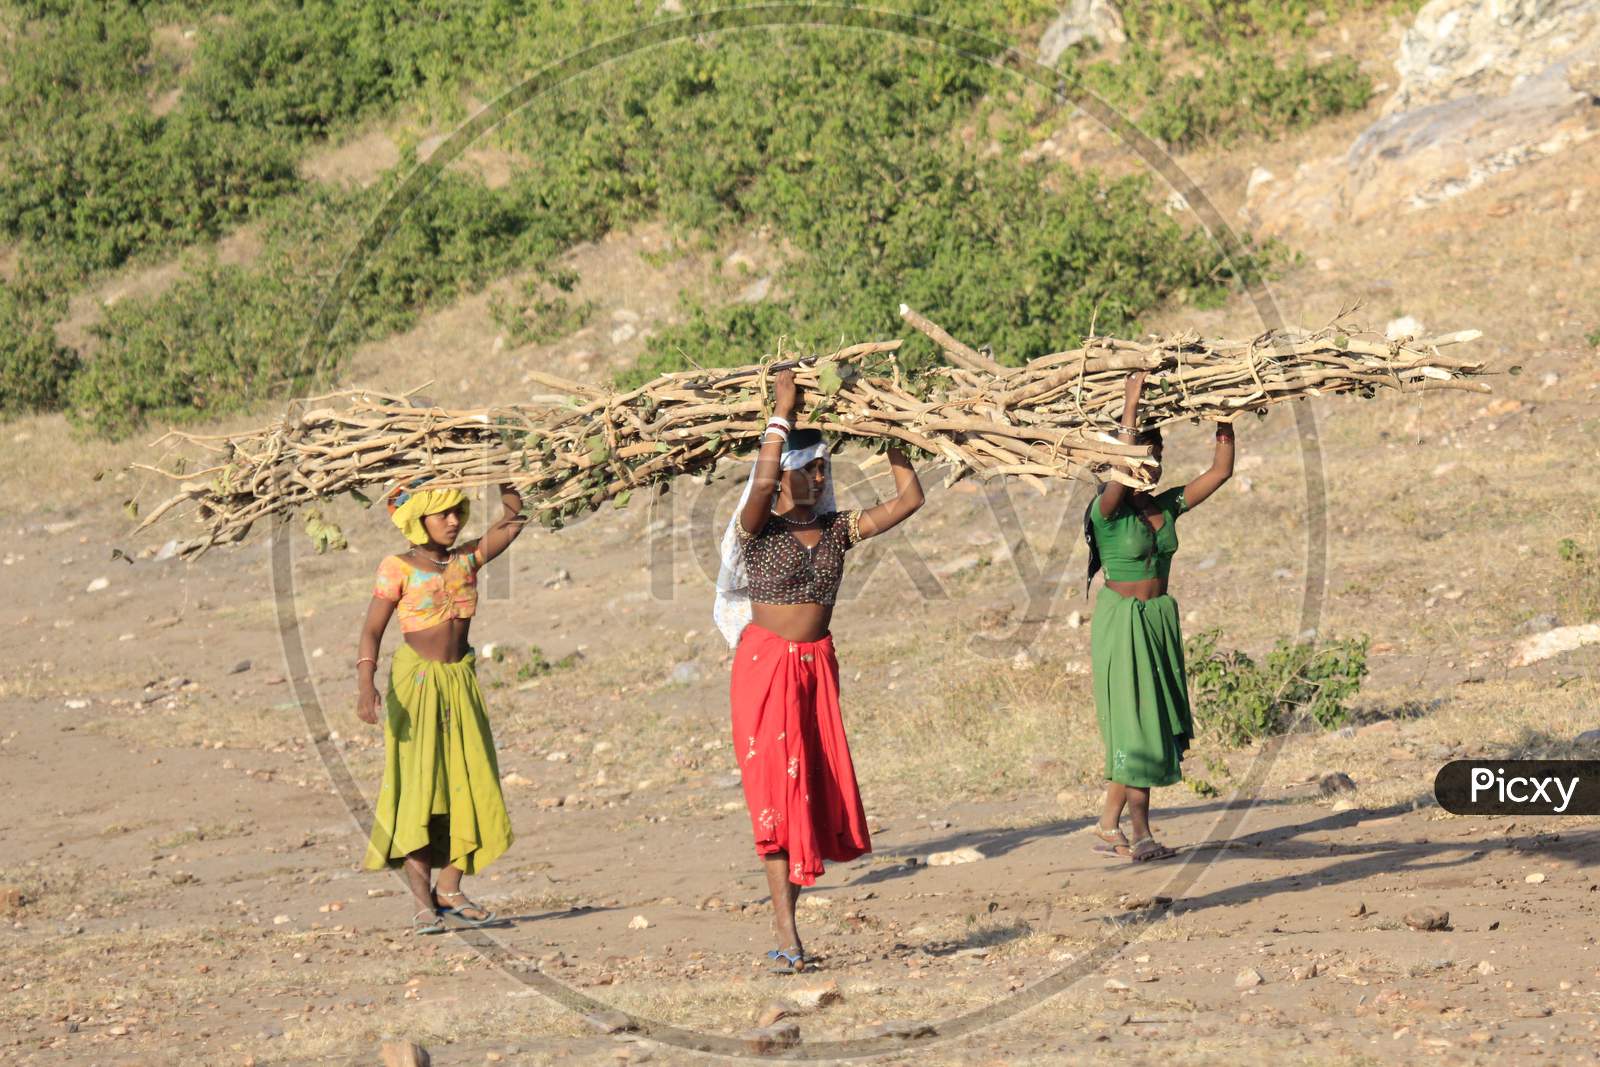 Indian Tribal Woman Carrying Cooking Wood From Forests In Tribal Villages Of India